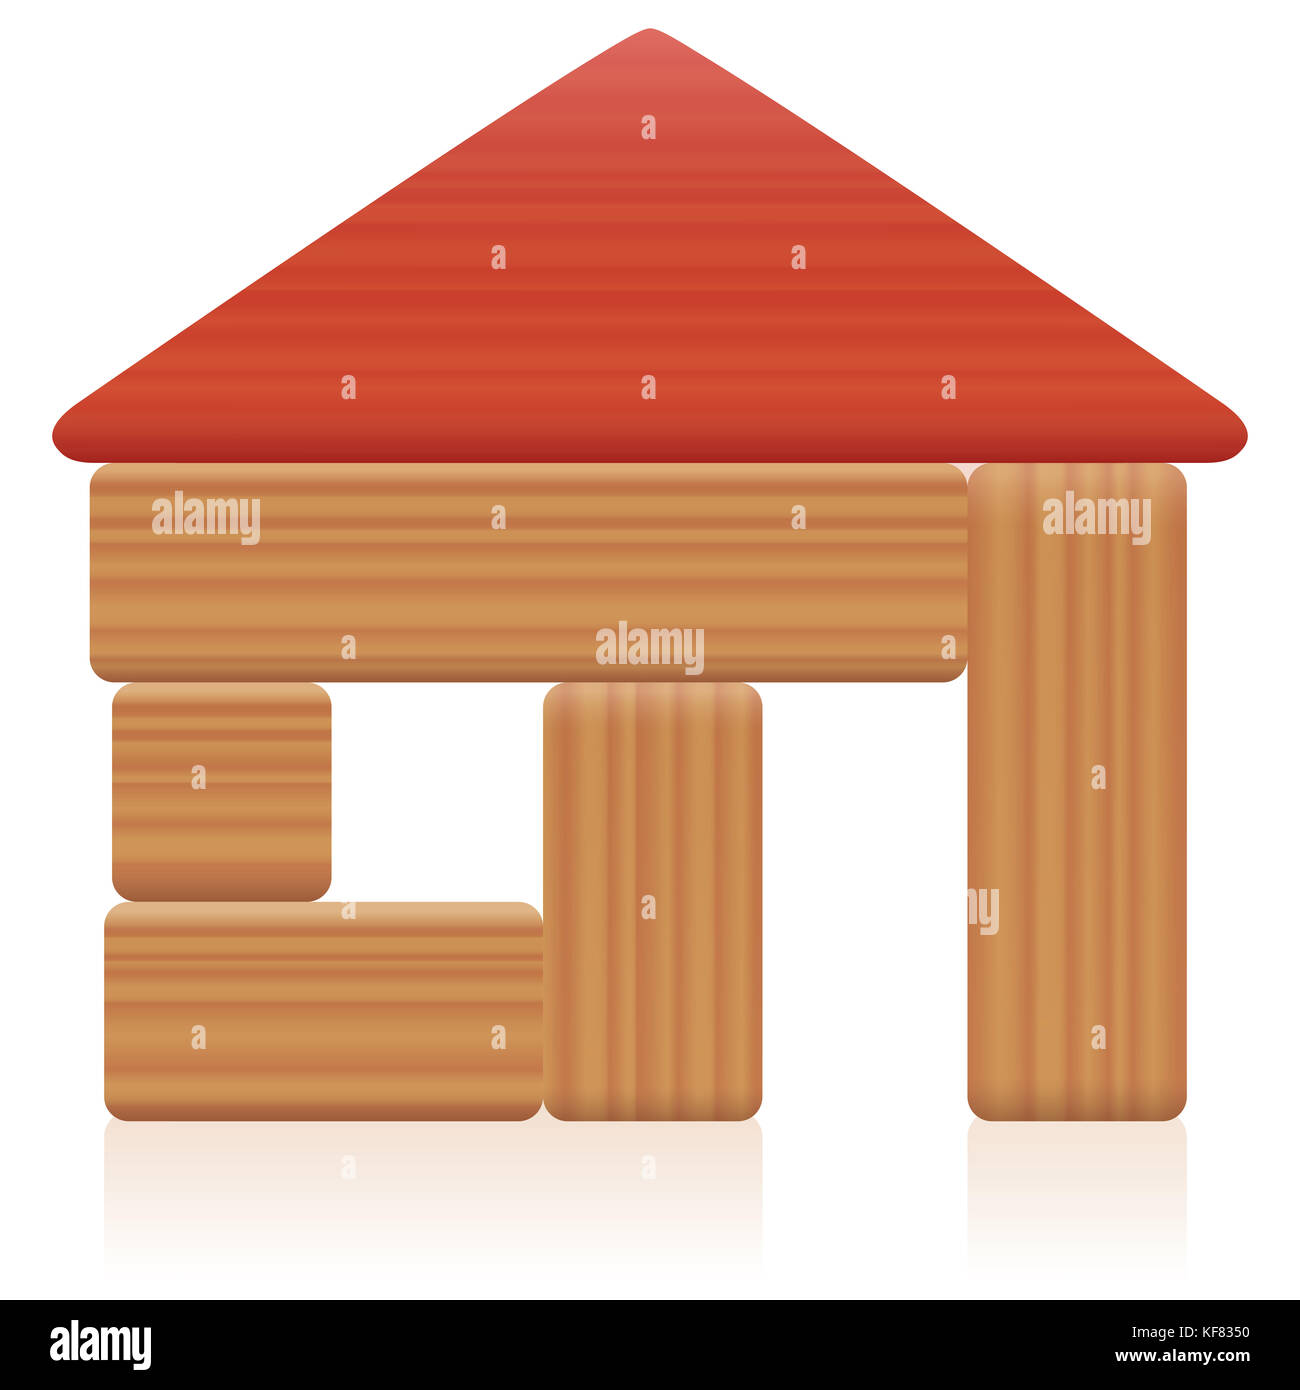 Simple small toy house built with a few wooden building blocks and a roof for a small family - symbol for simplicity concerning easy living. Stock Photo